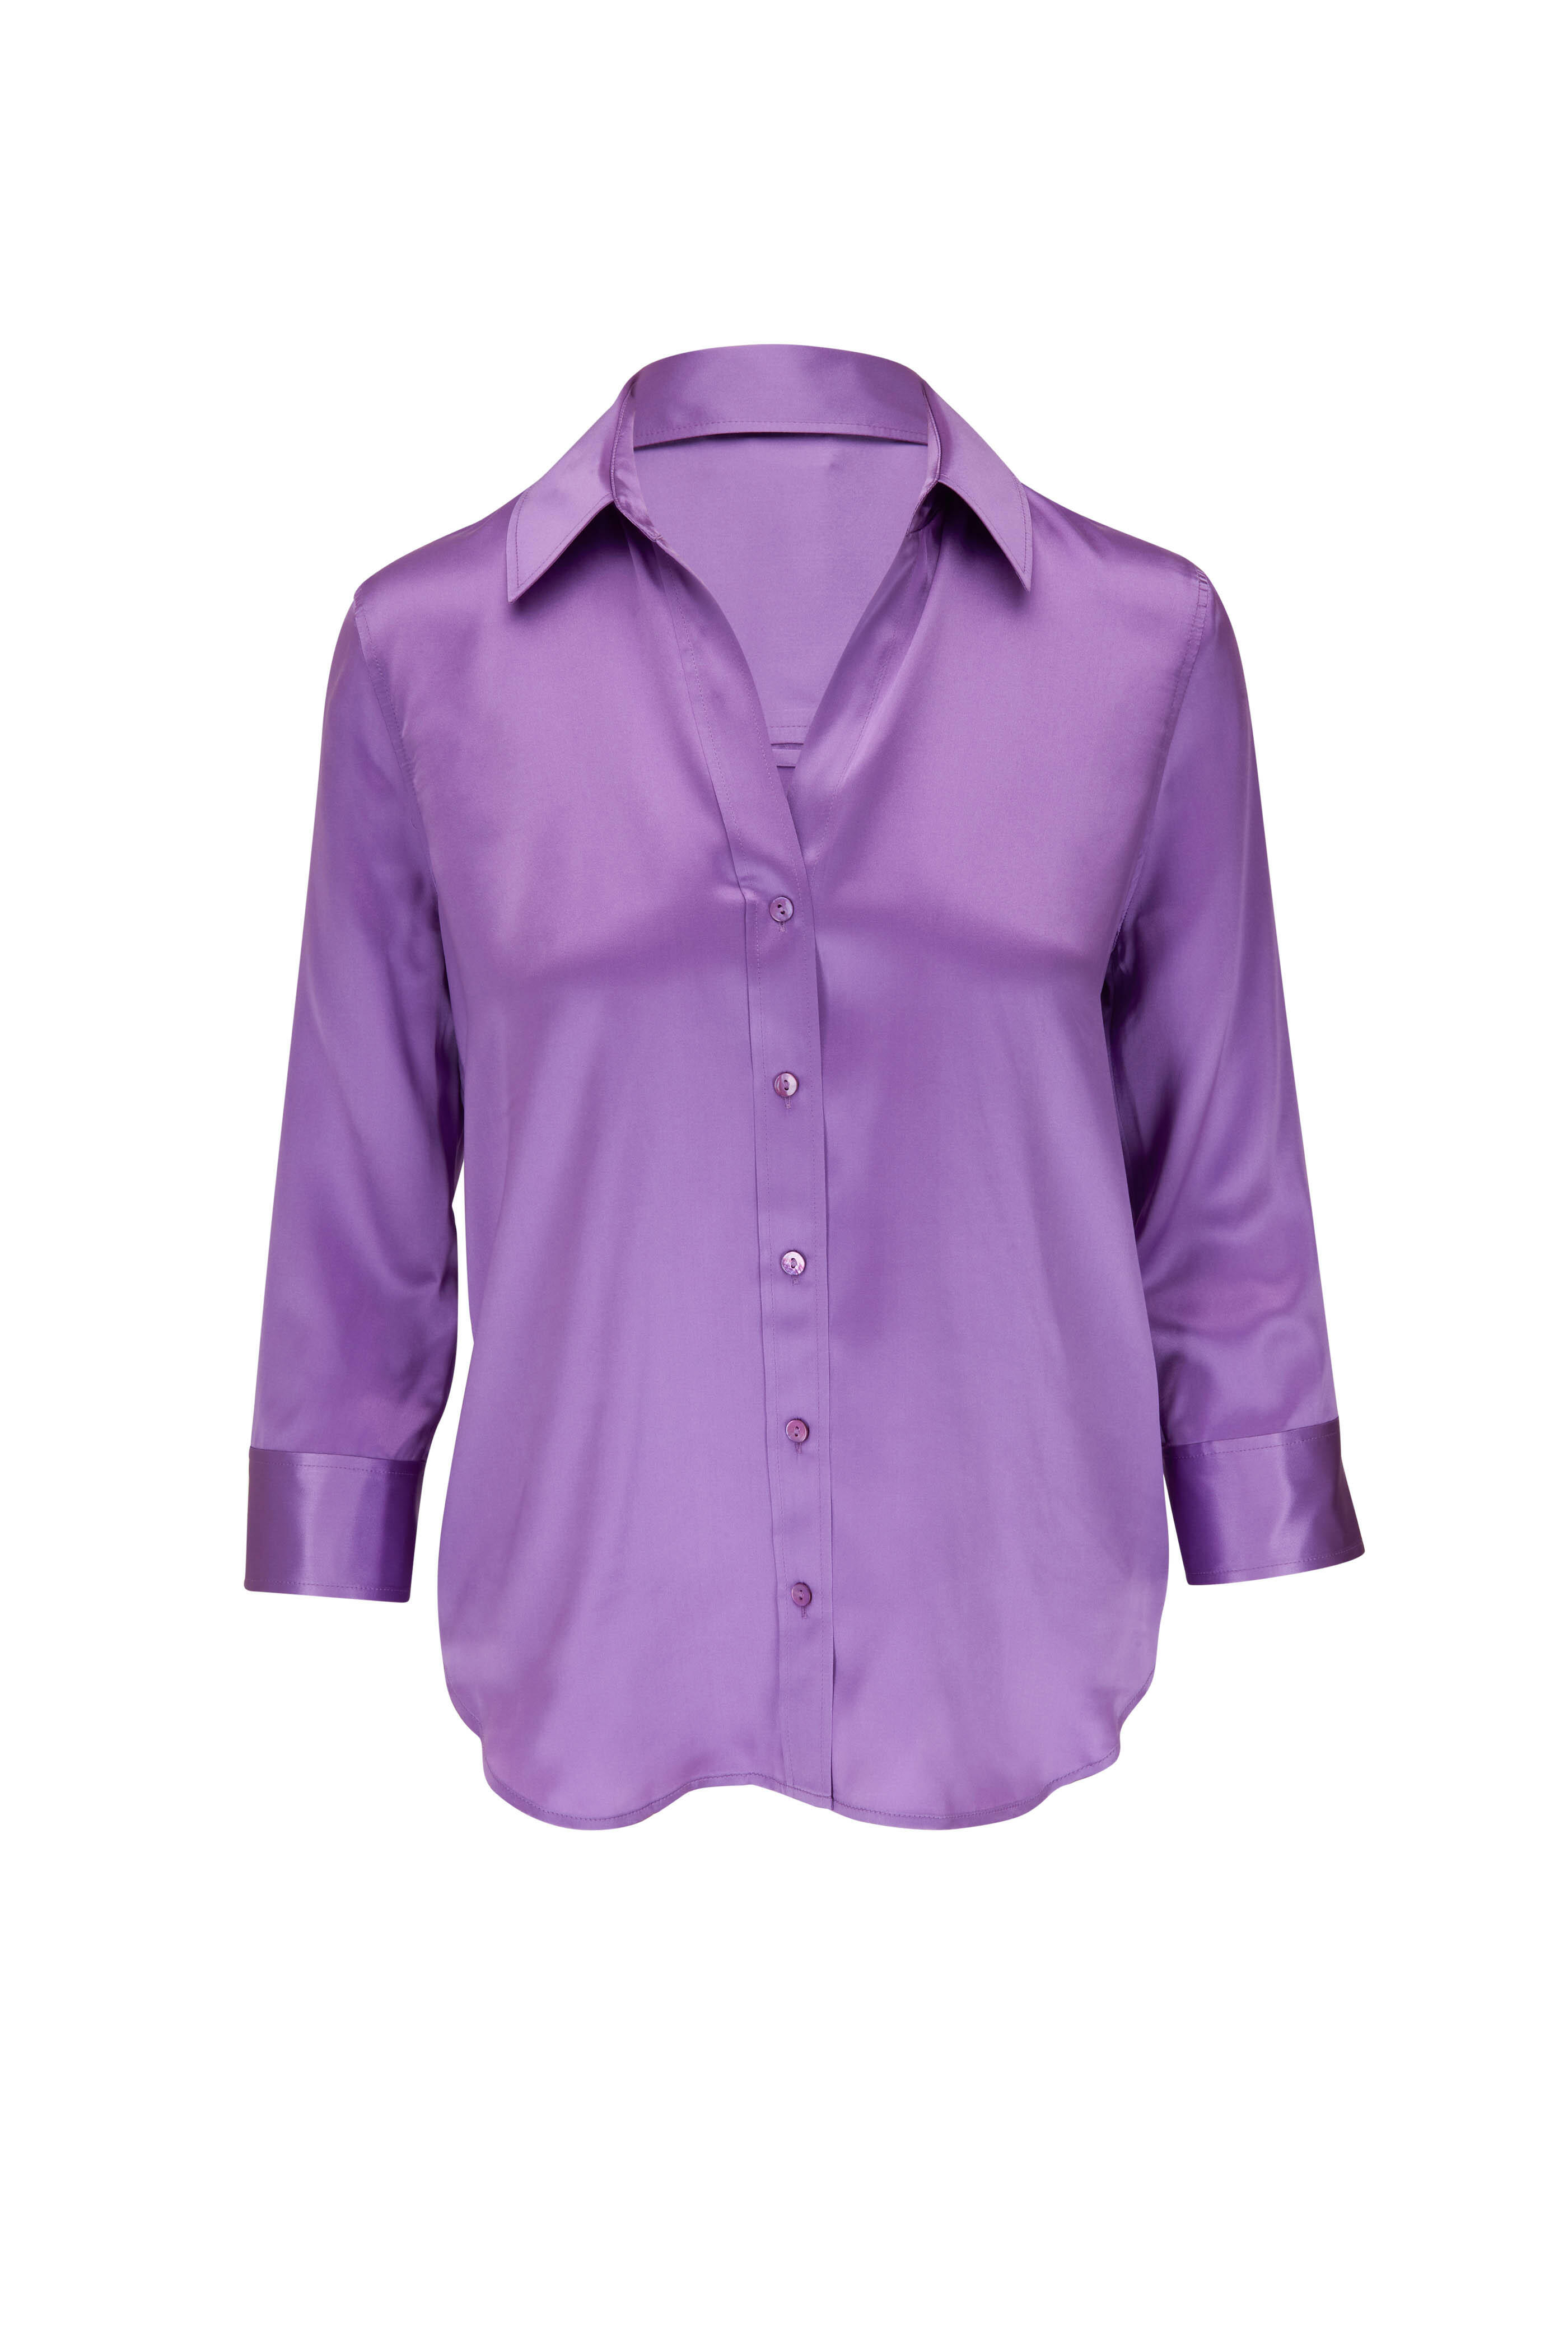 L'Agence - Dani Orchid Silk Blouse | Mitchell Stores